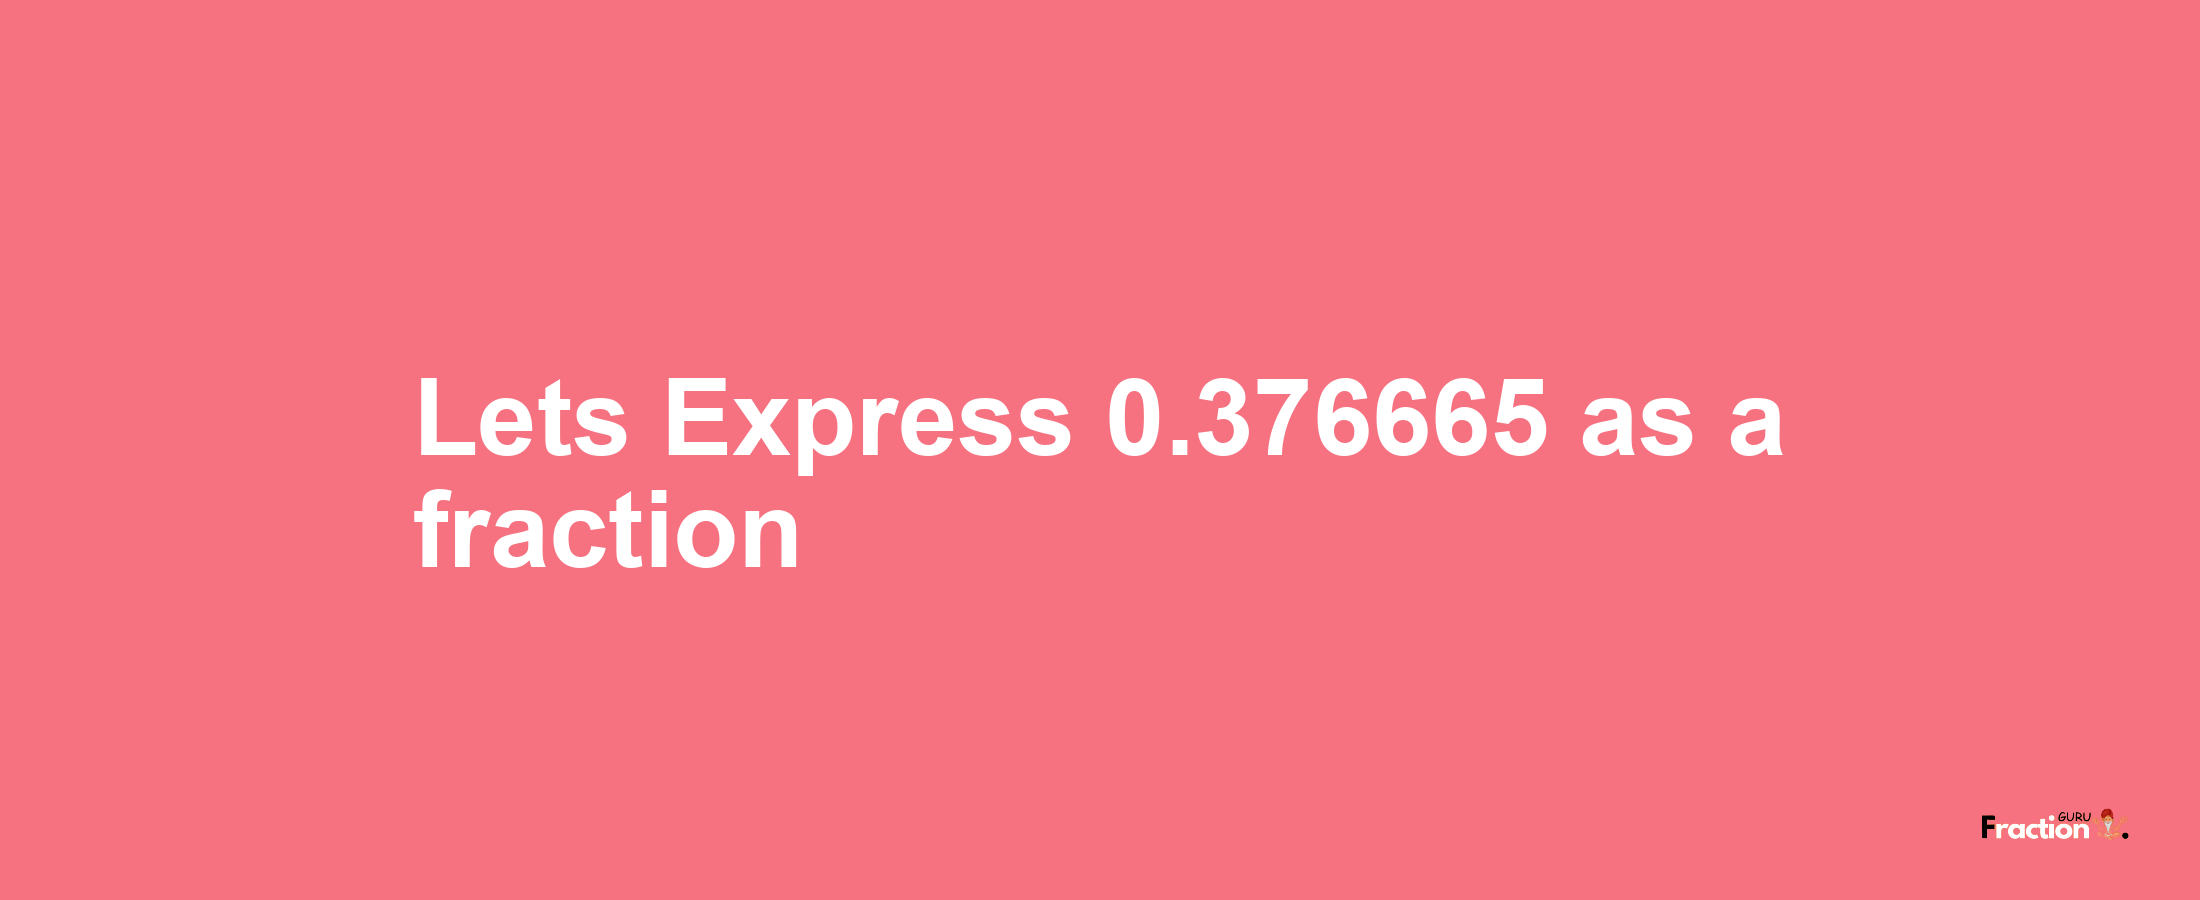 Lets Express 0.376665 as afraction